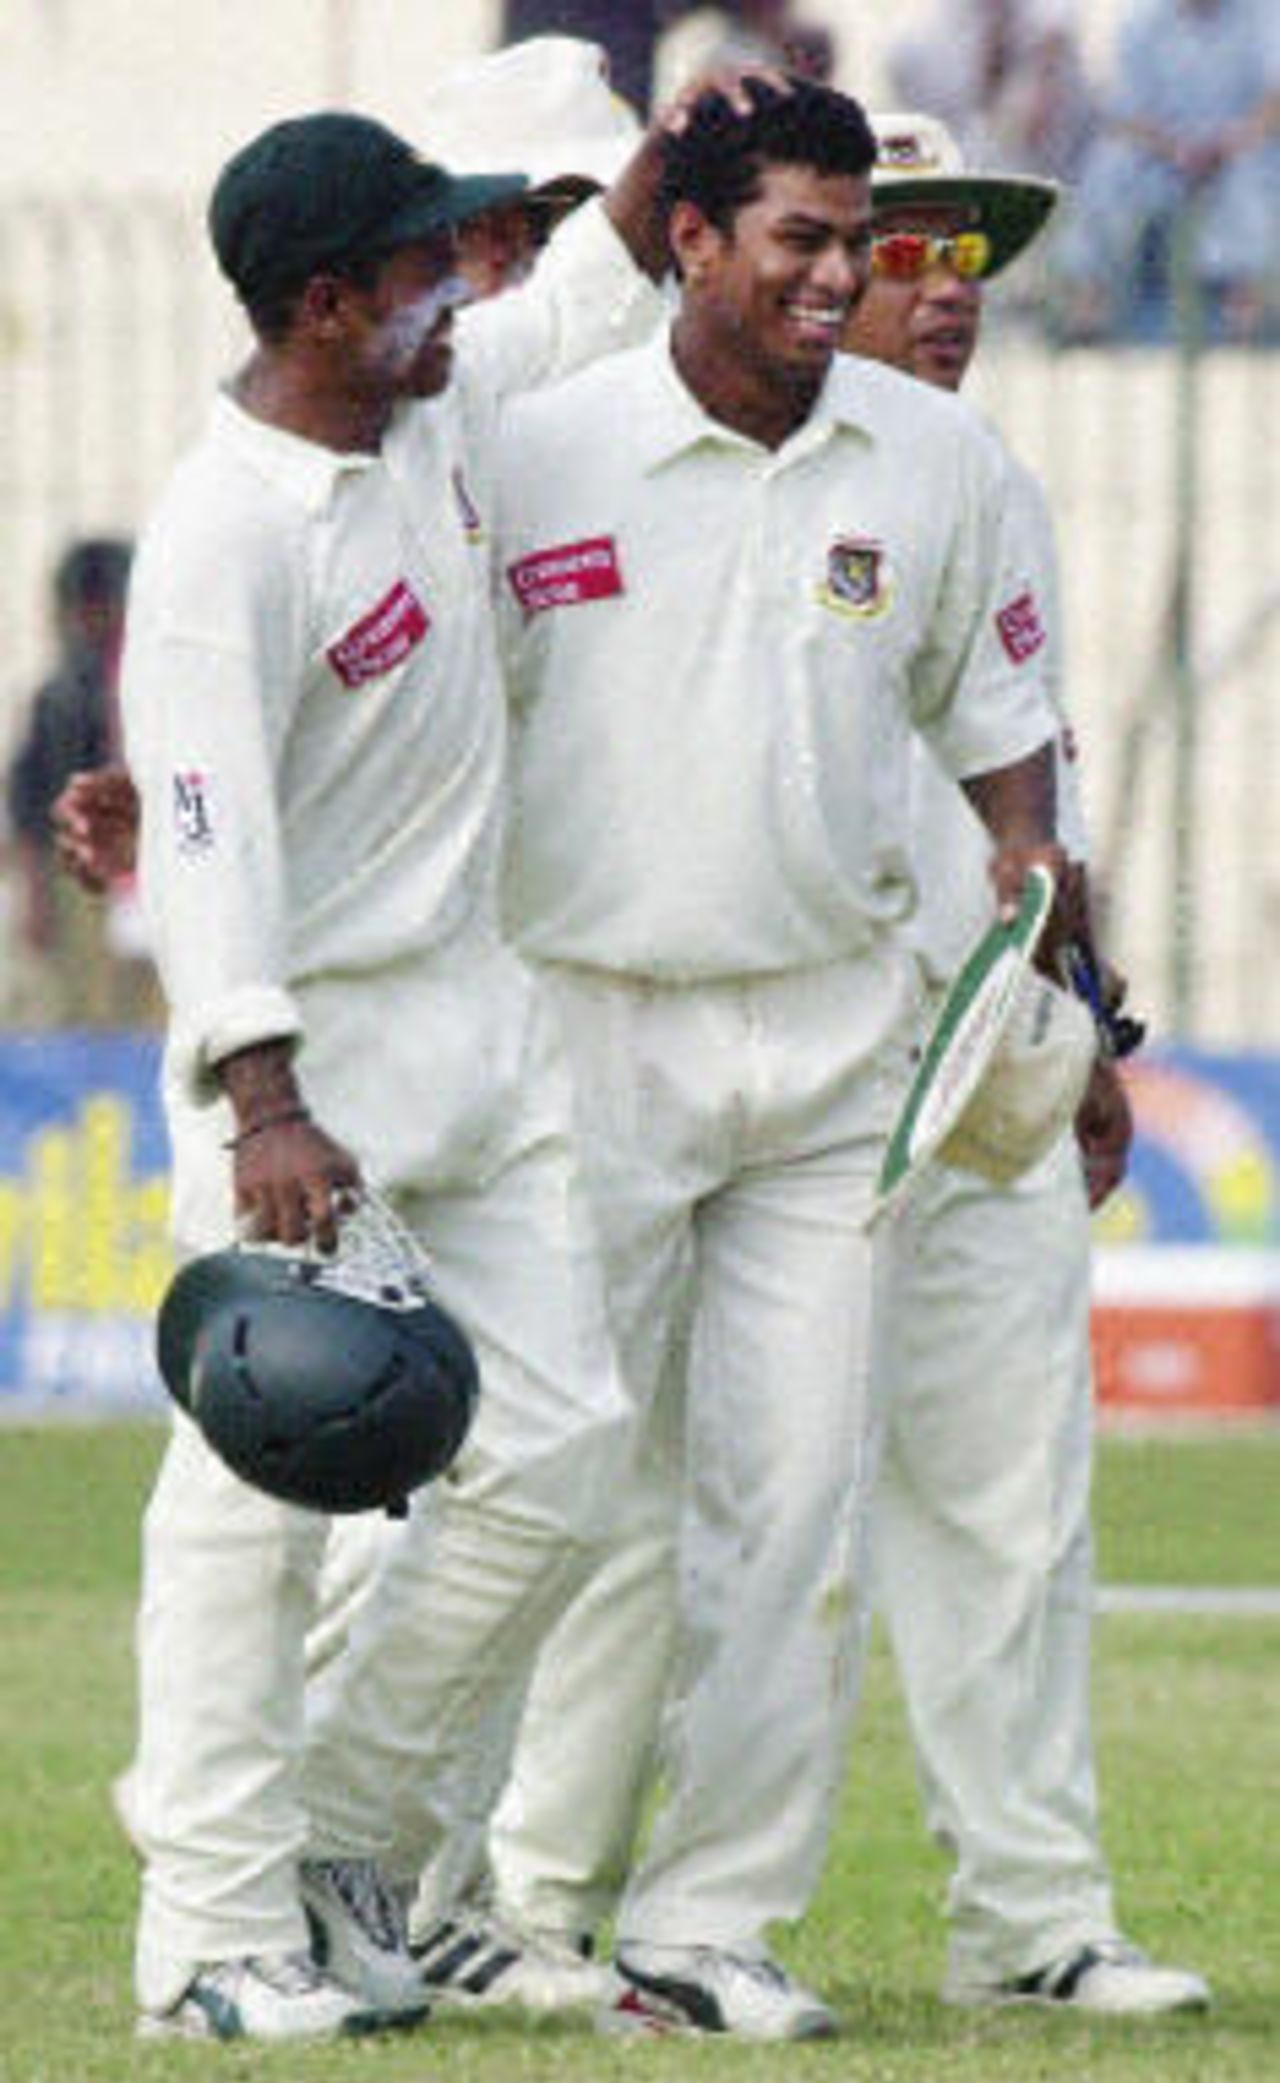 Alok Kapali (C) being congratulated by his teammates after his hat-trick during the third day of the second Test between Pakistan and Bangladesh in Peshawar, 29 August 2003.